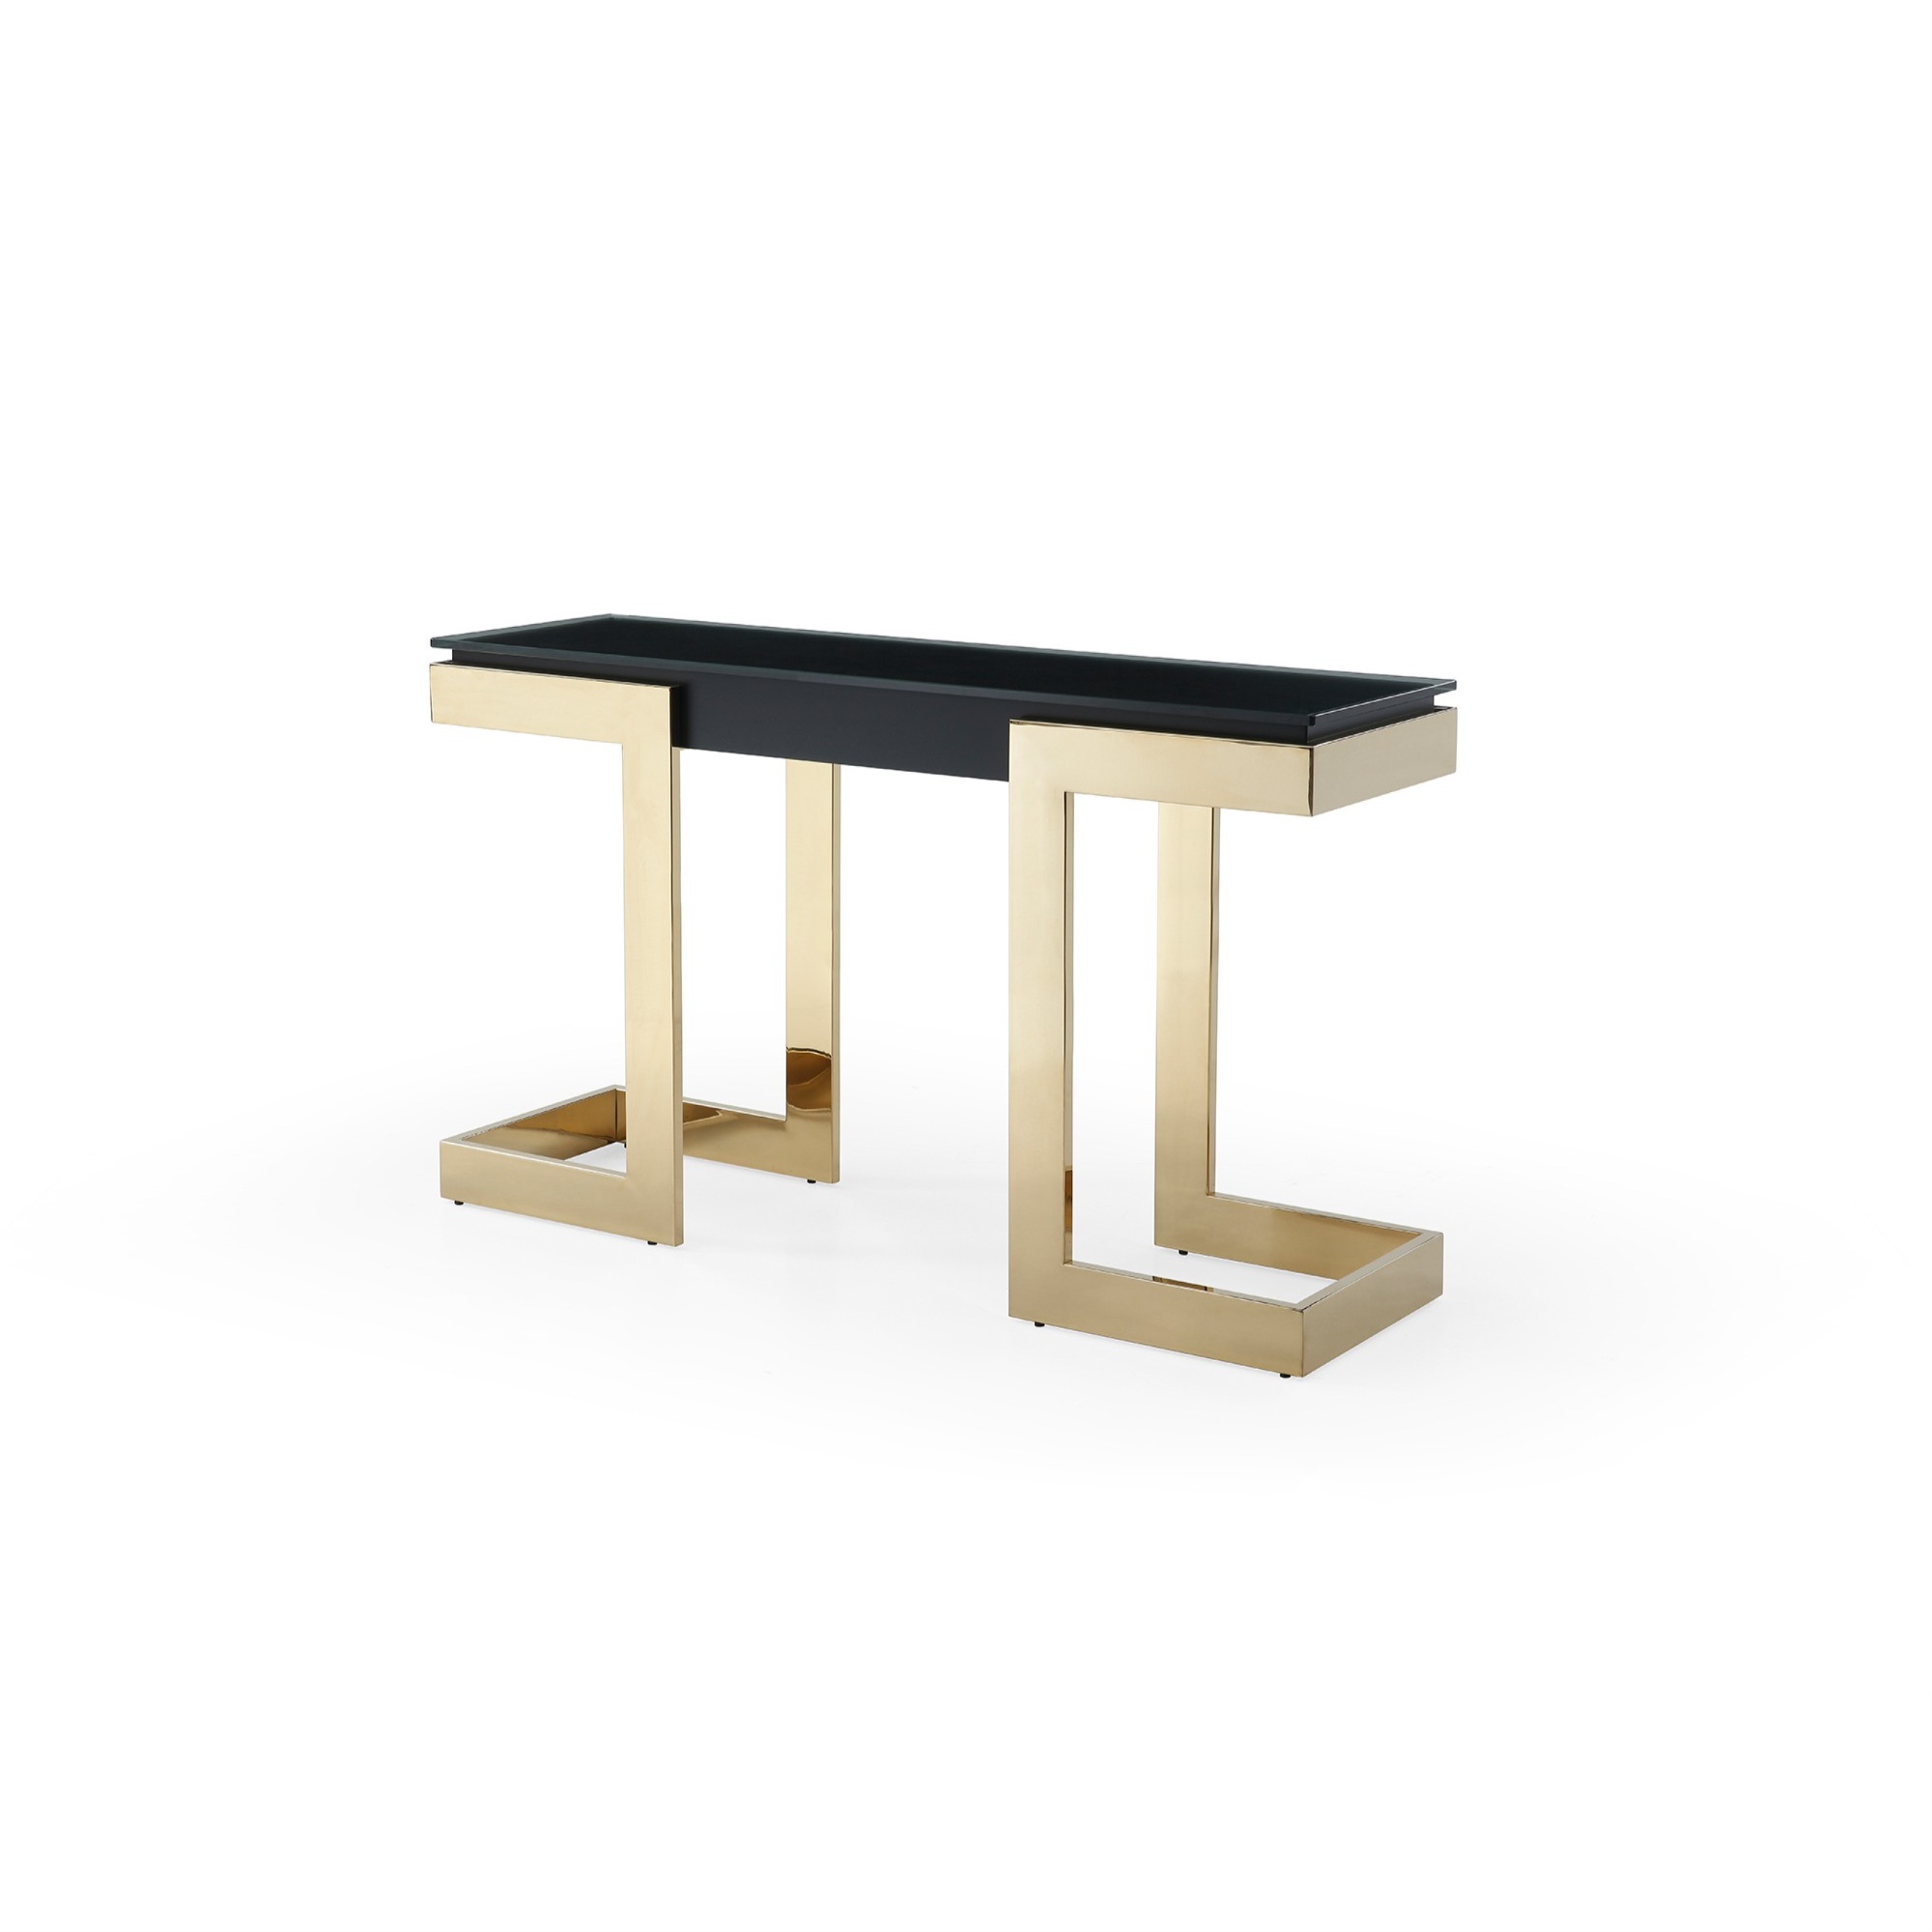 Sumo Console, 10mm glass top, Connector in black, Polished gold stainless base. - image 2 of 4